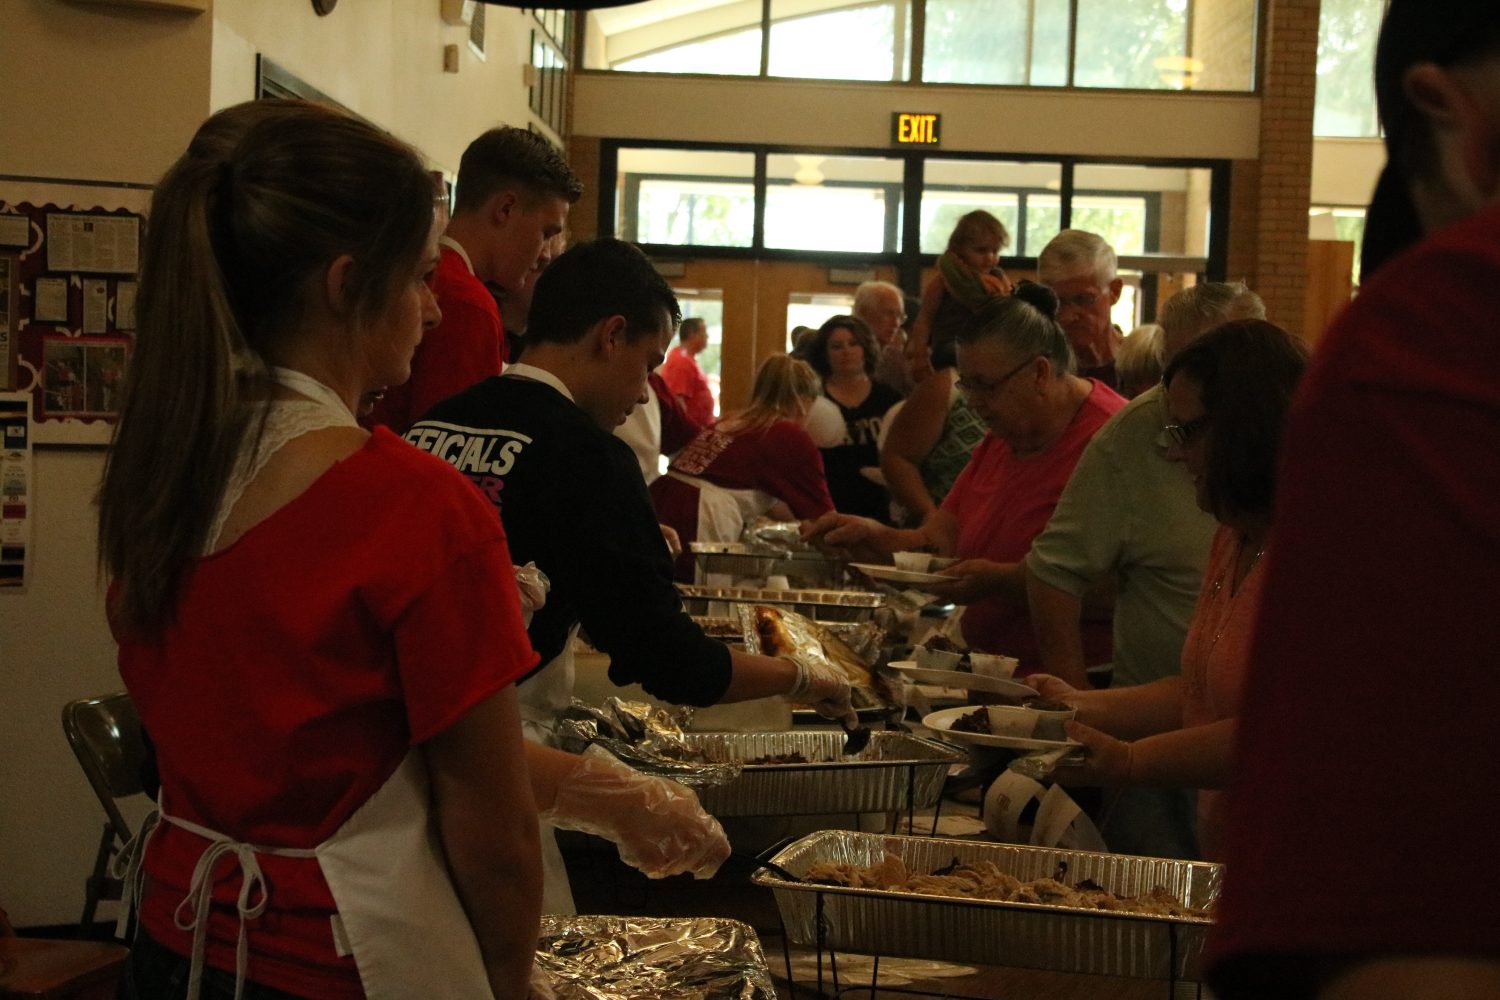 Skills USA Clubs cater at Taste of Eaton